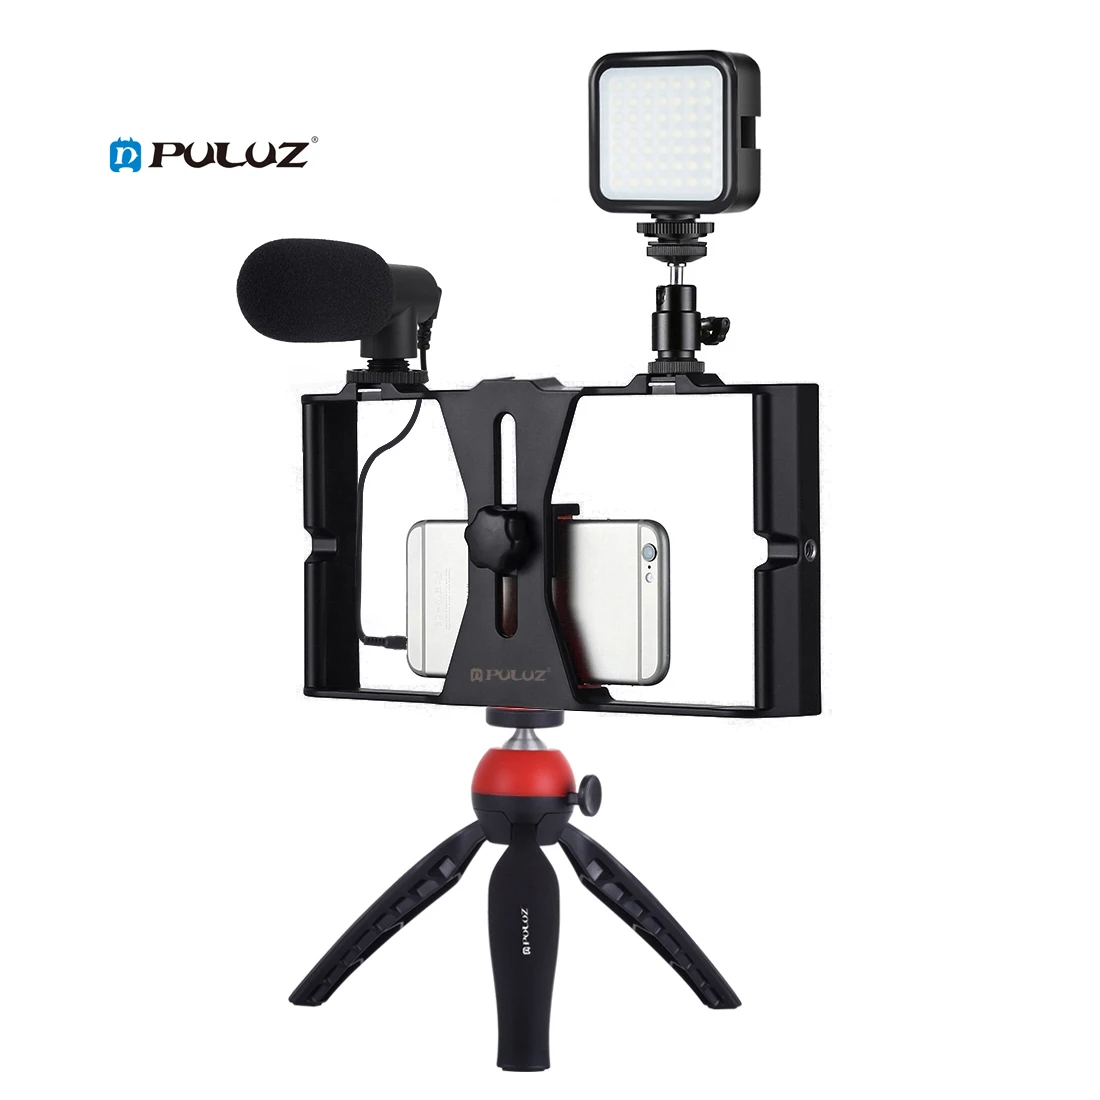 

Dropshipping PULUZ 4 in 1 Vlogging Live Broadcast Smartphone Video Camera Rig Ring LED Selfie Light Kits with Microphone Tripod